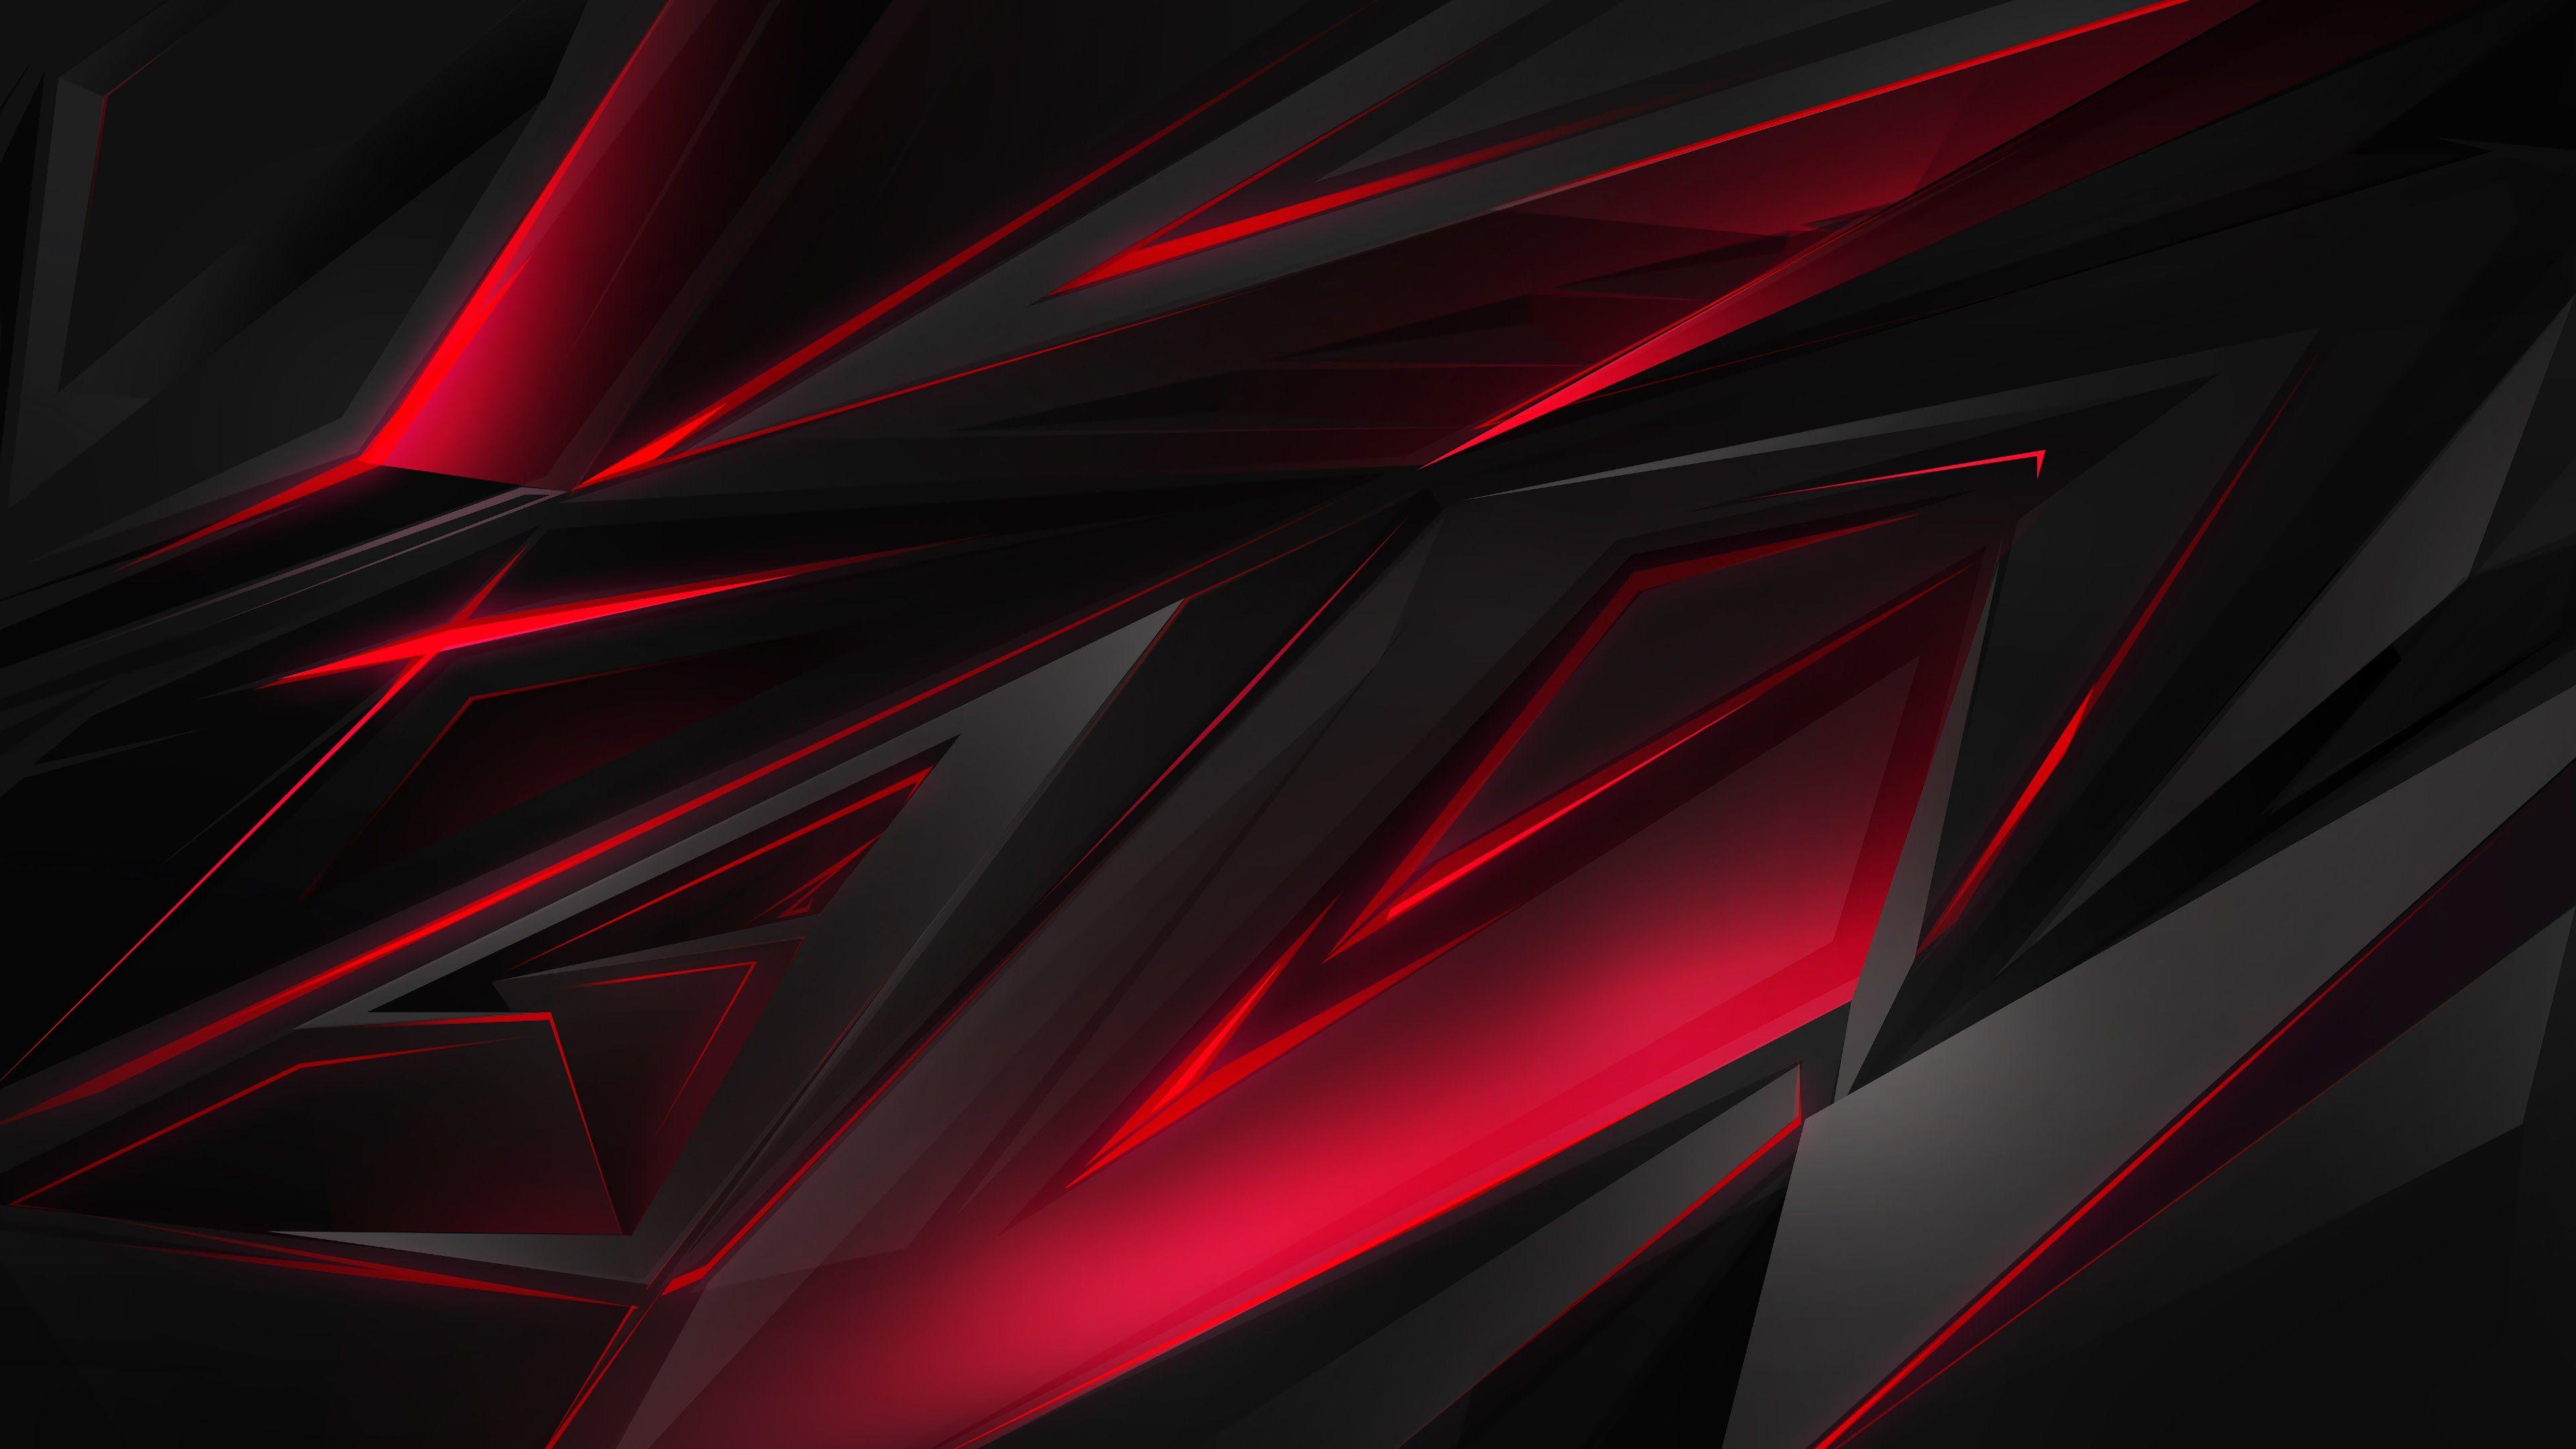 Red And Black 4k Ultra Hd Wallpapers Top Free Red And Black 4k Ultra